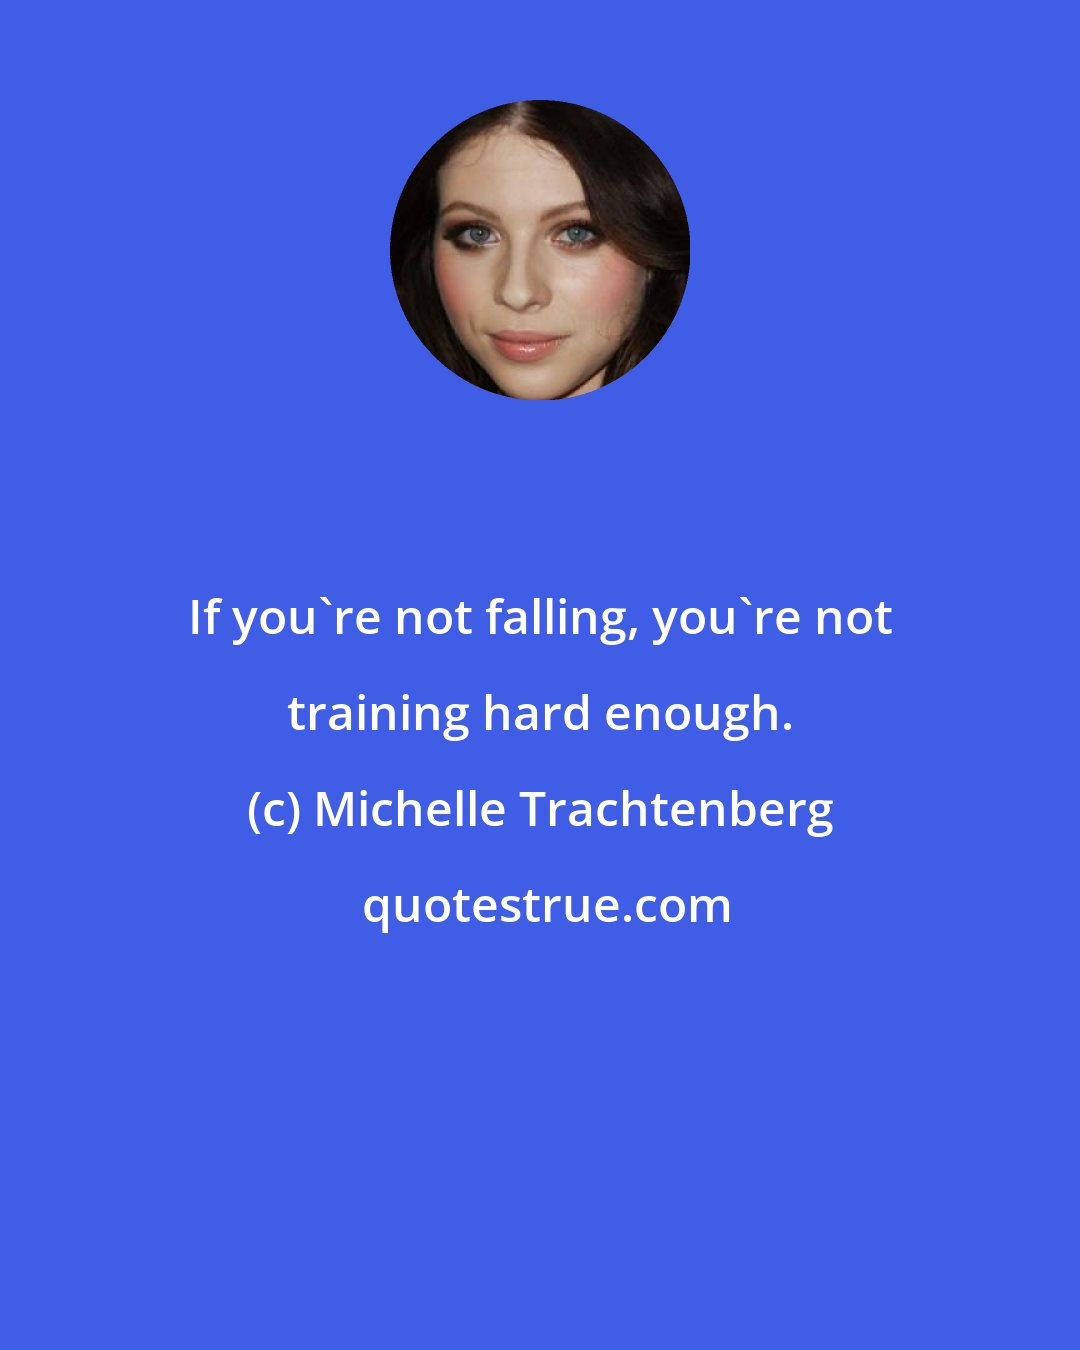 Michelle Trachtenberg: If you're not falling, you're not training hard enough.